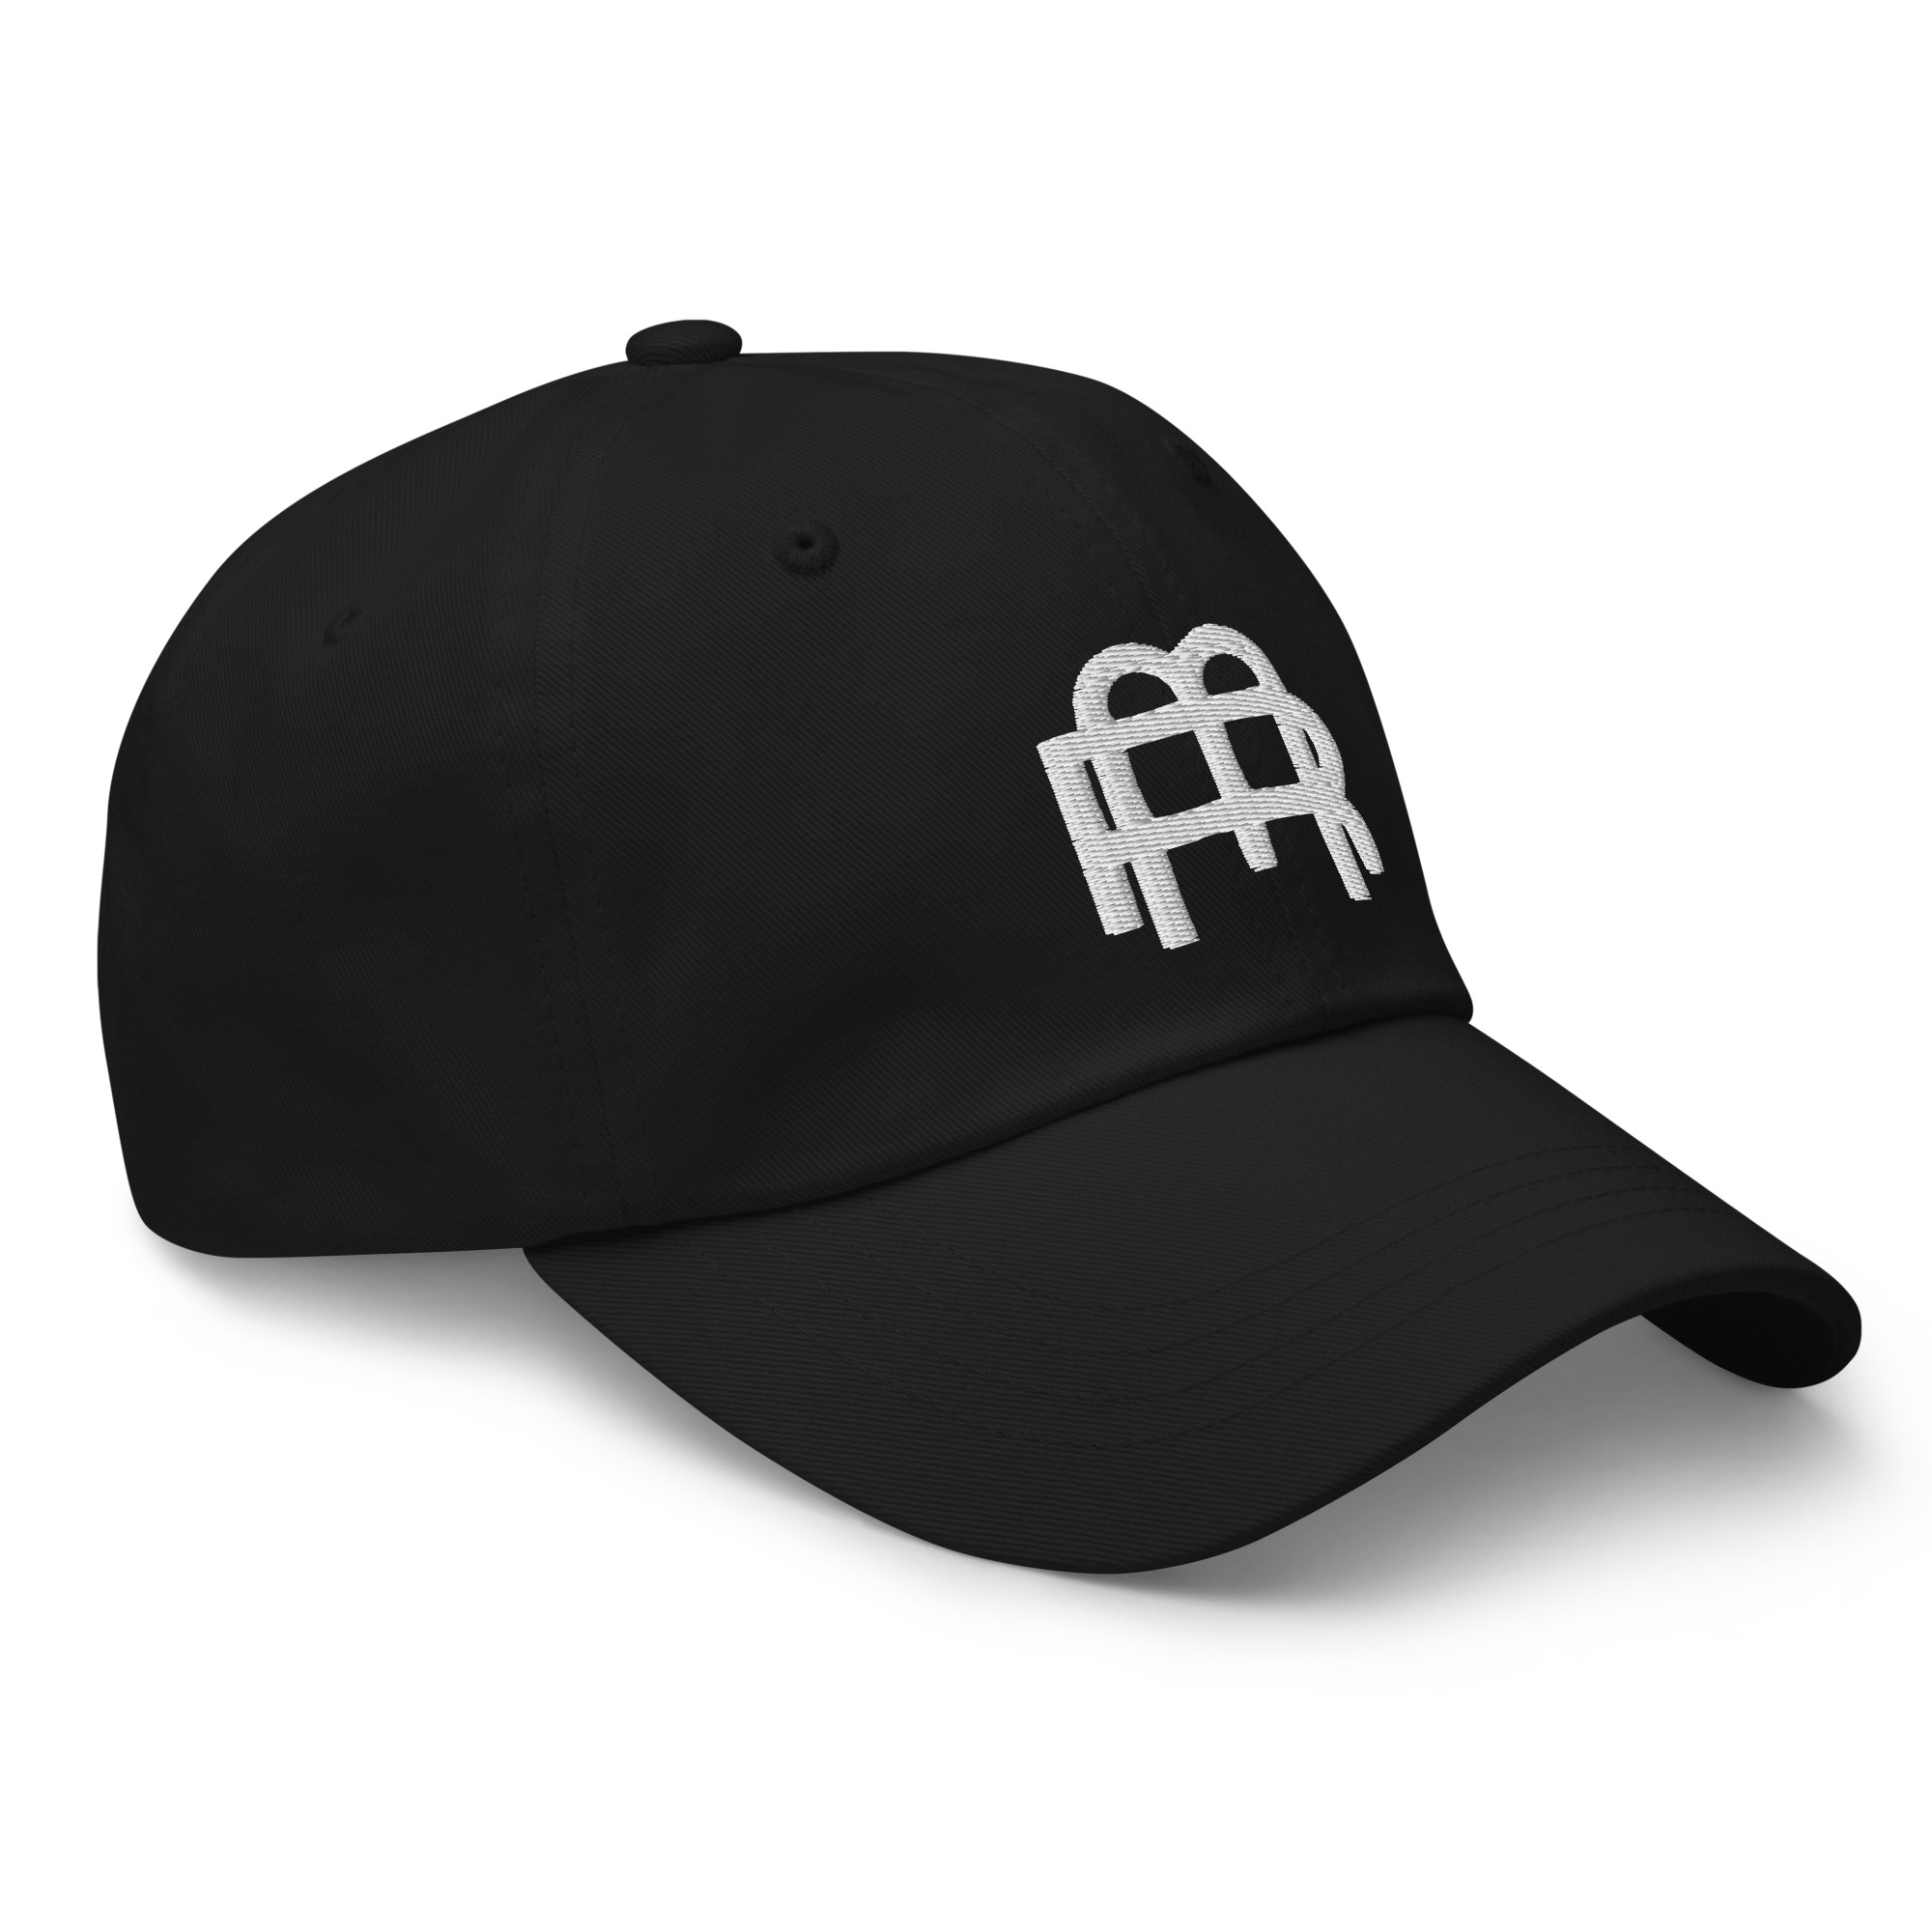 classic-dad-hat-black-right-front-63e59c8fc1a45.jpg